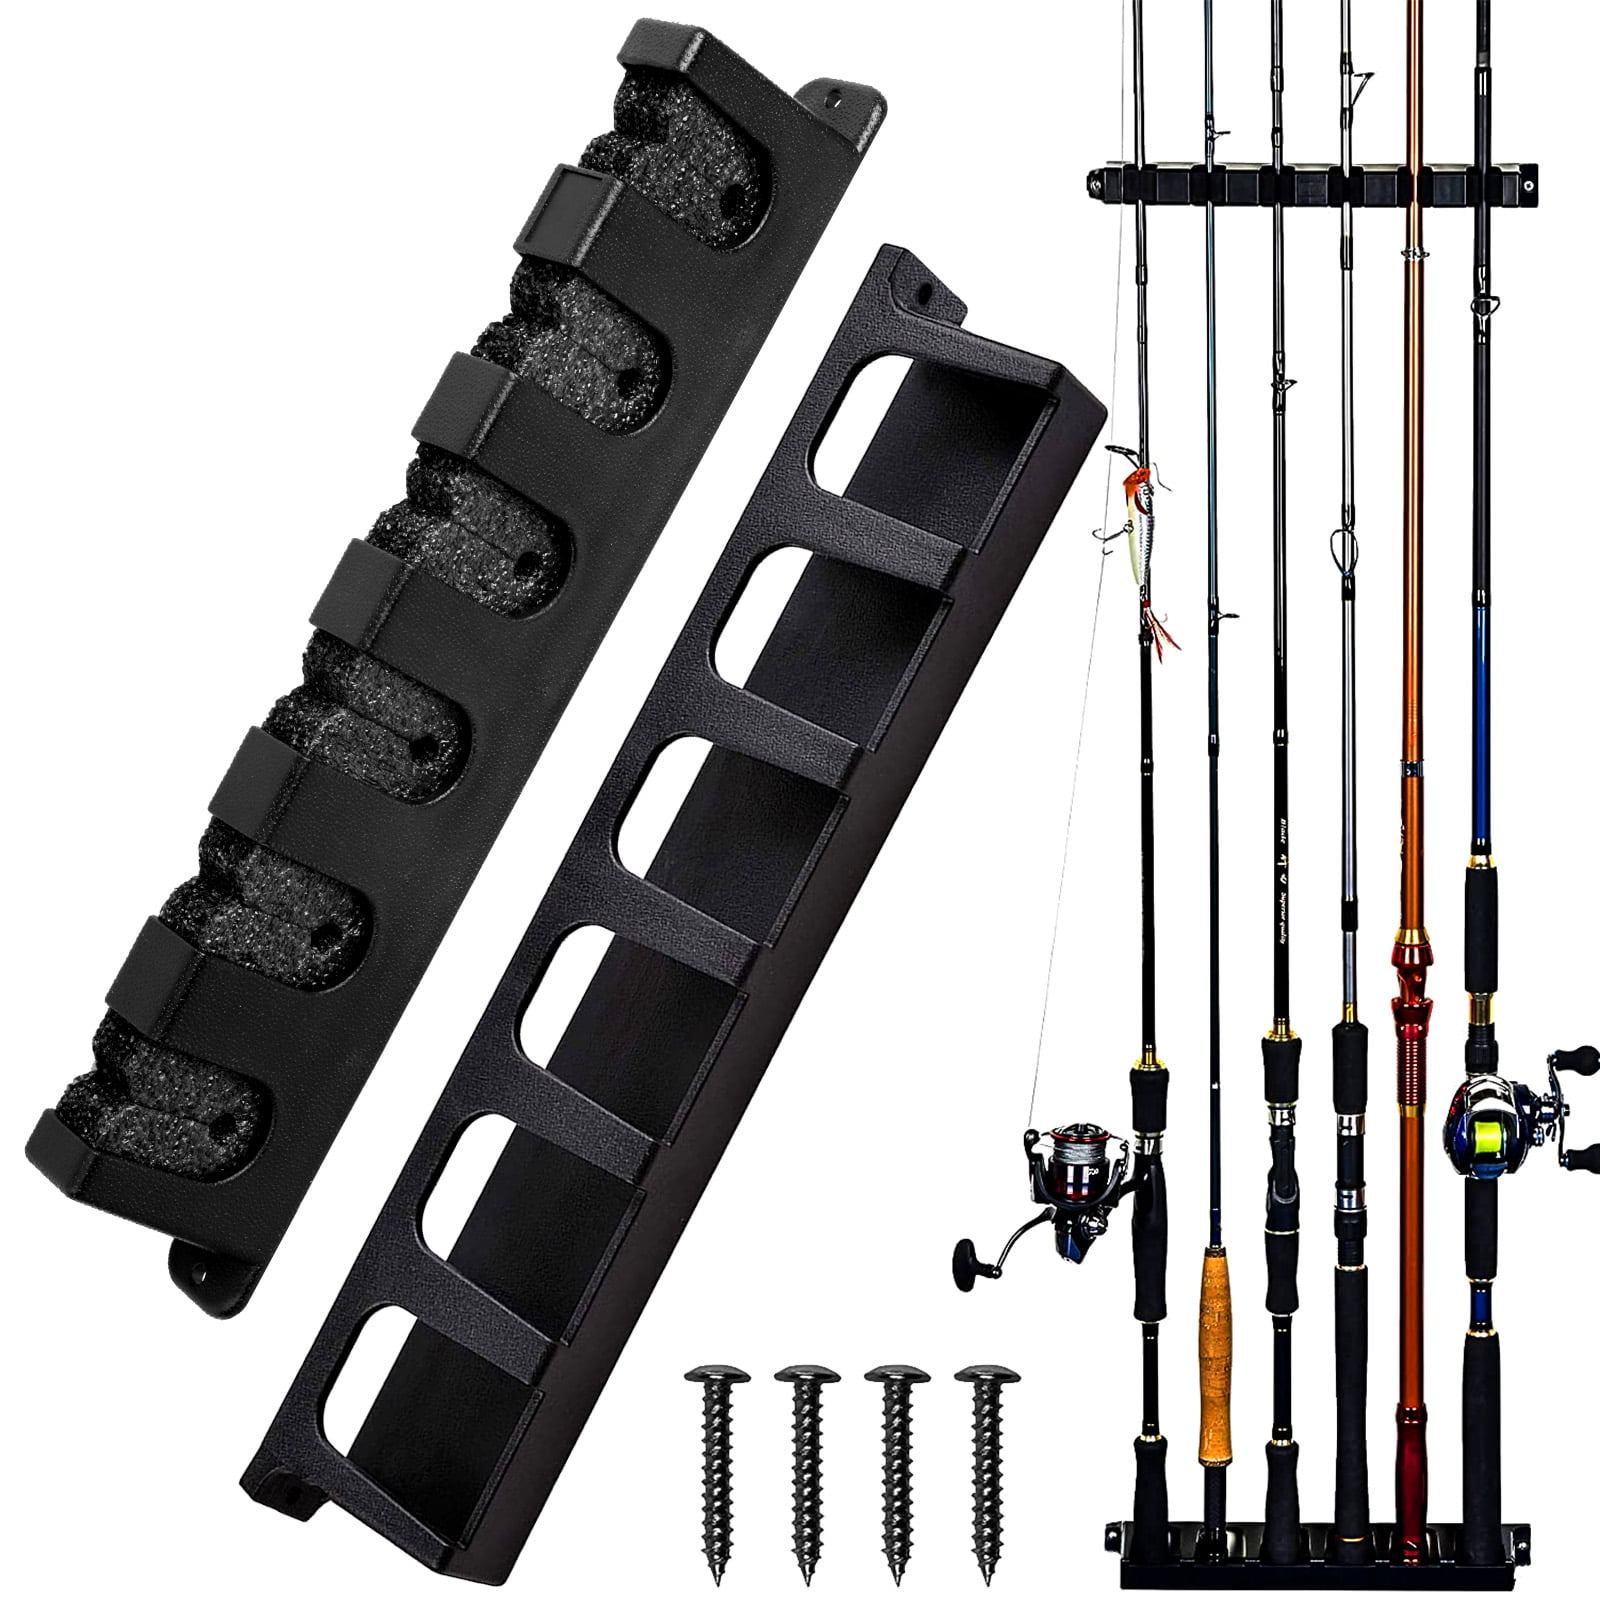 Tools Wall Mounted Fishing Rod Racks Storage Clips Clamps Holder Rack Organizer